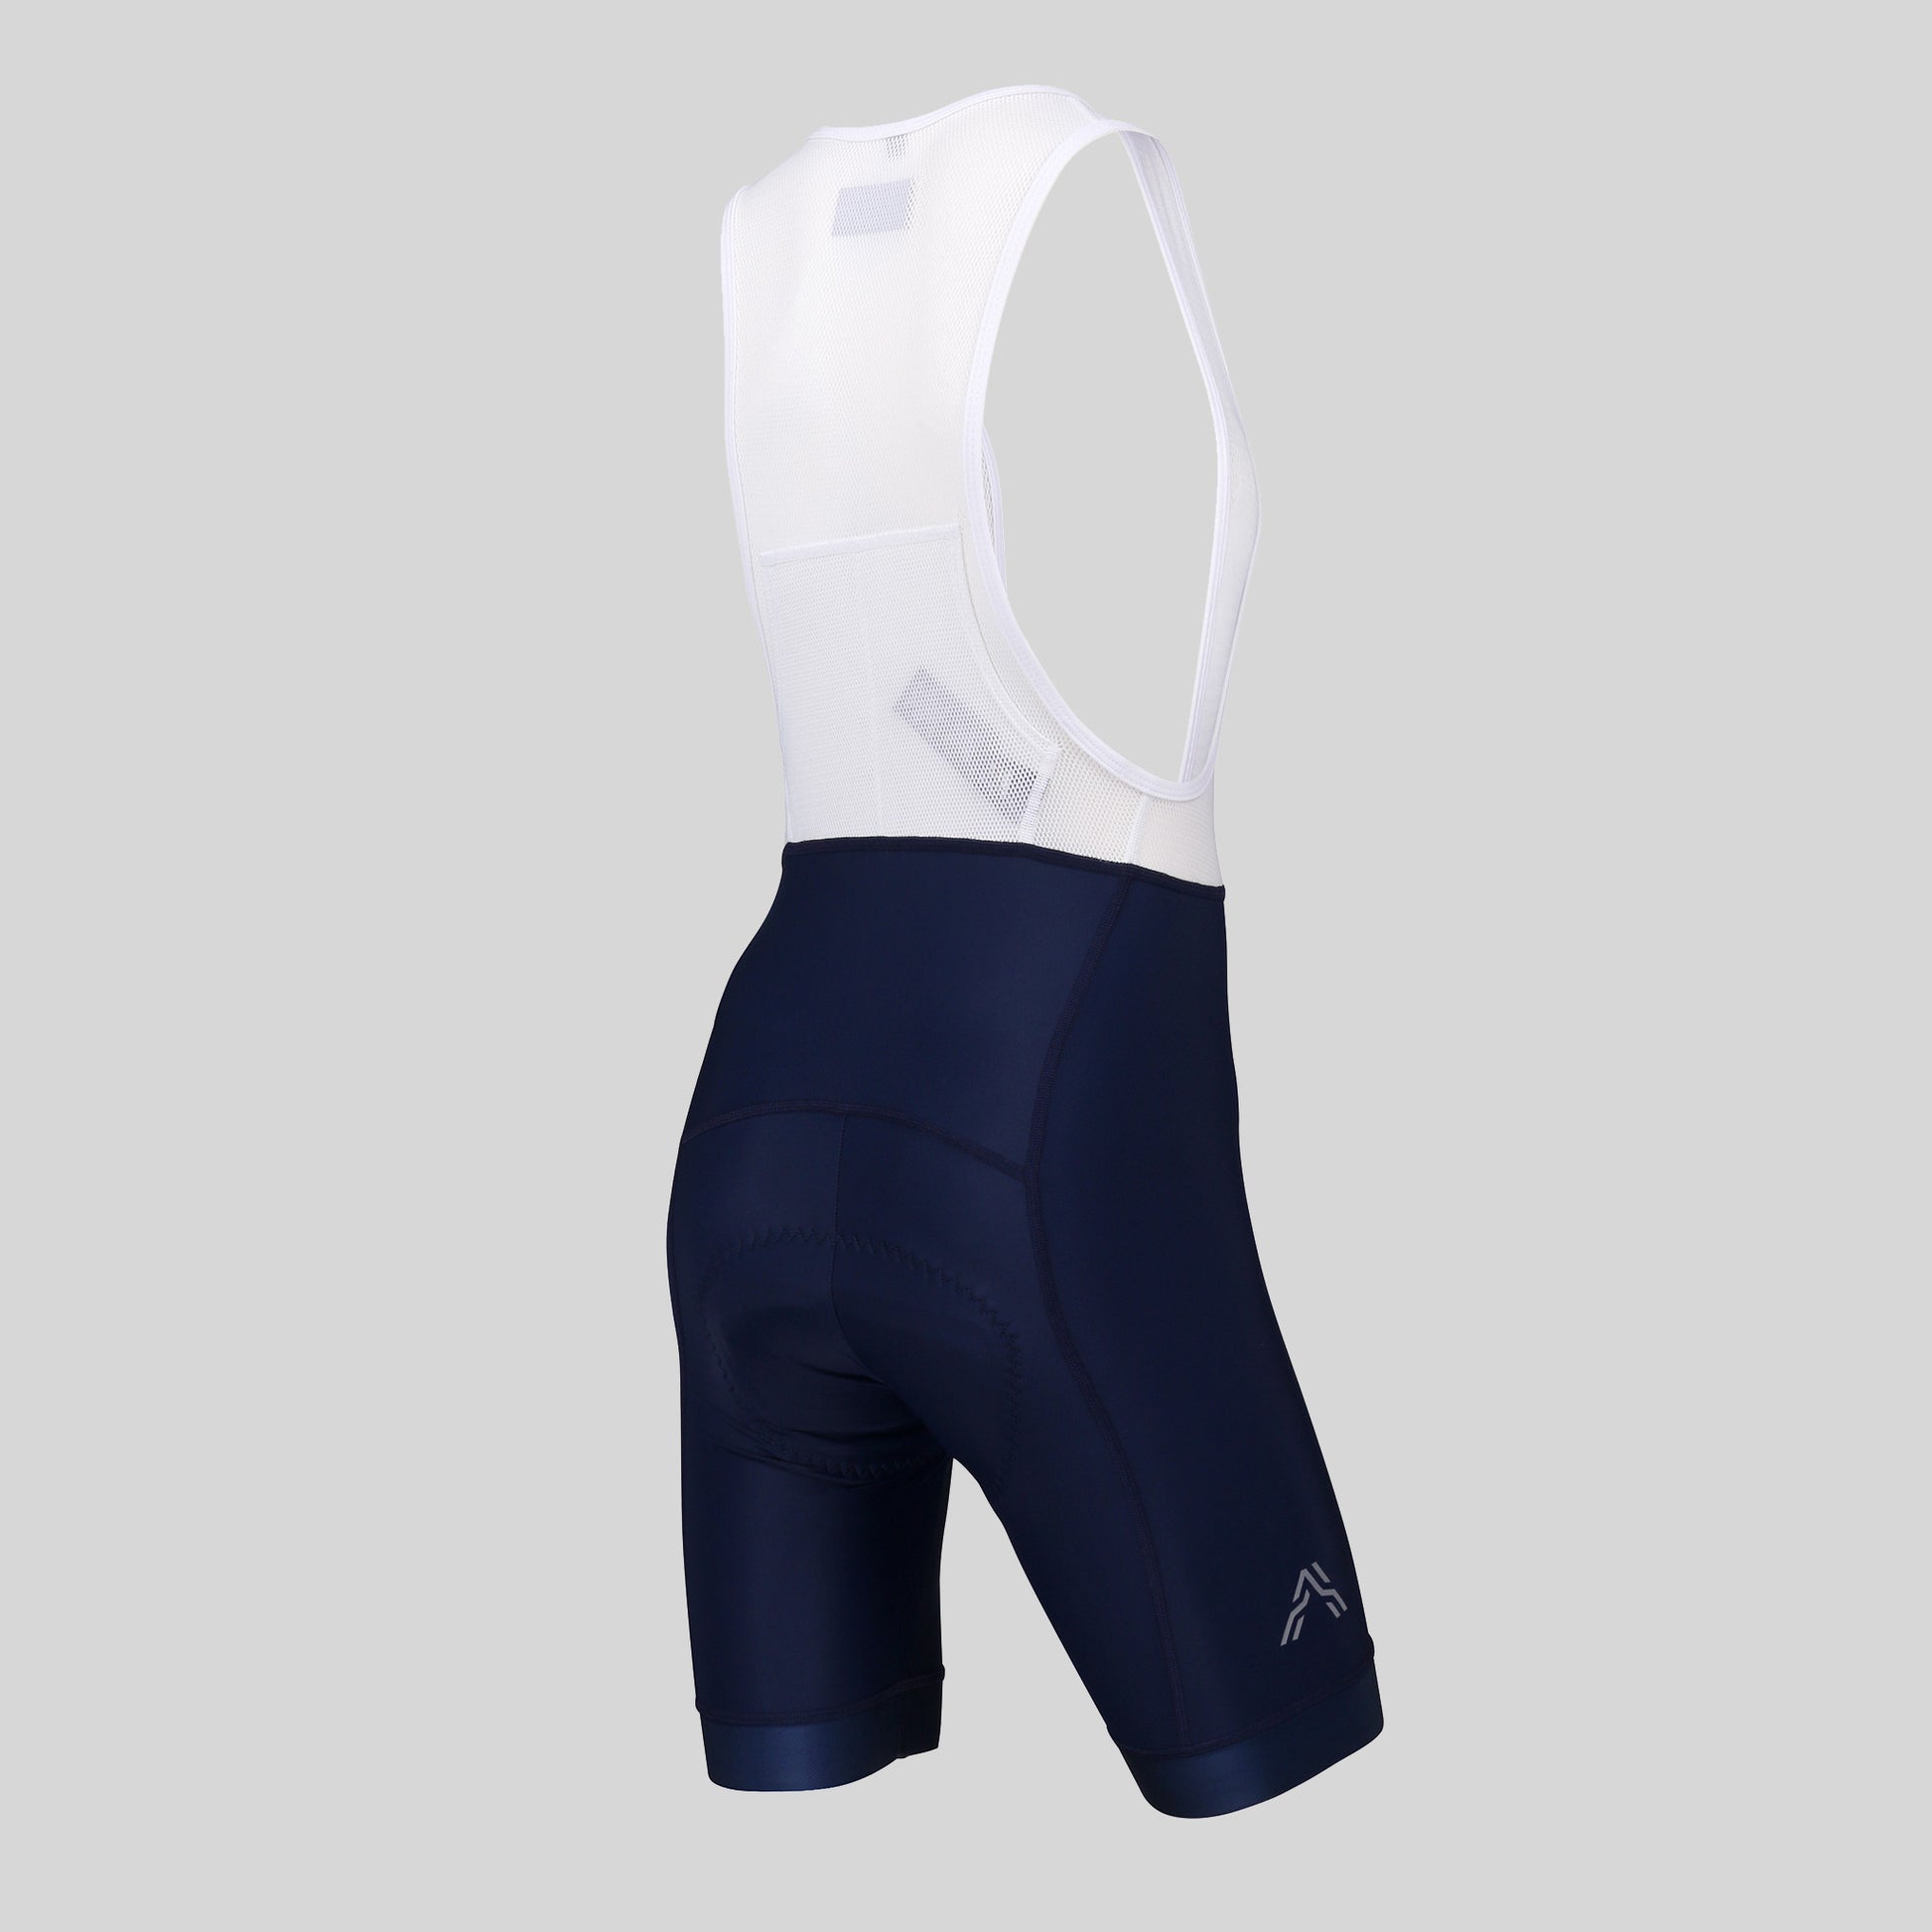 Epona Women Bib Short Navy by Ascender Cycling Club Zürich in Switzerland Front Right with Reflective Logo and Two Rear Cargo Pockets